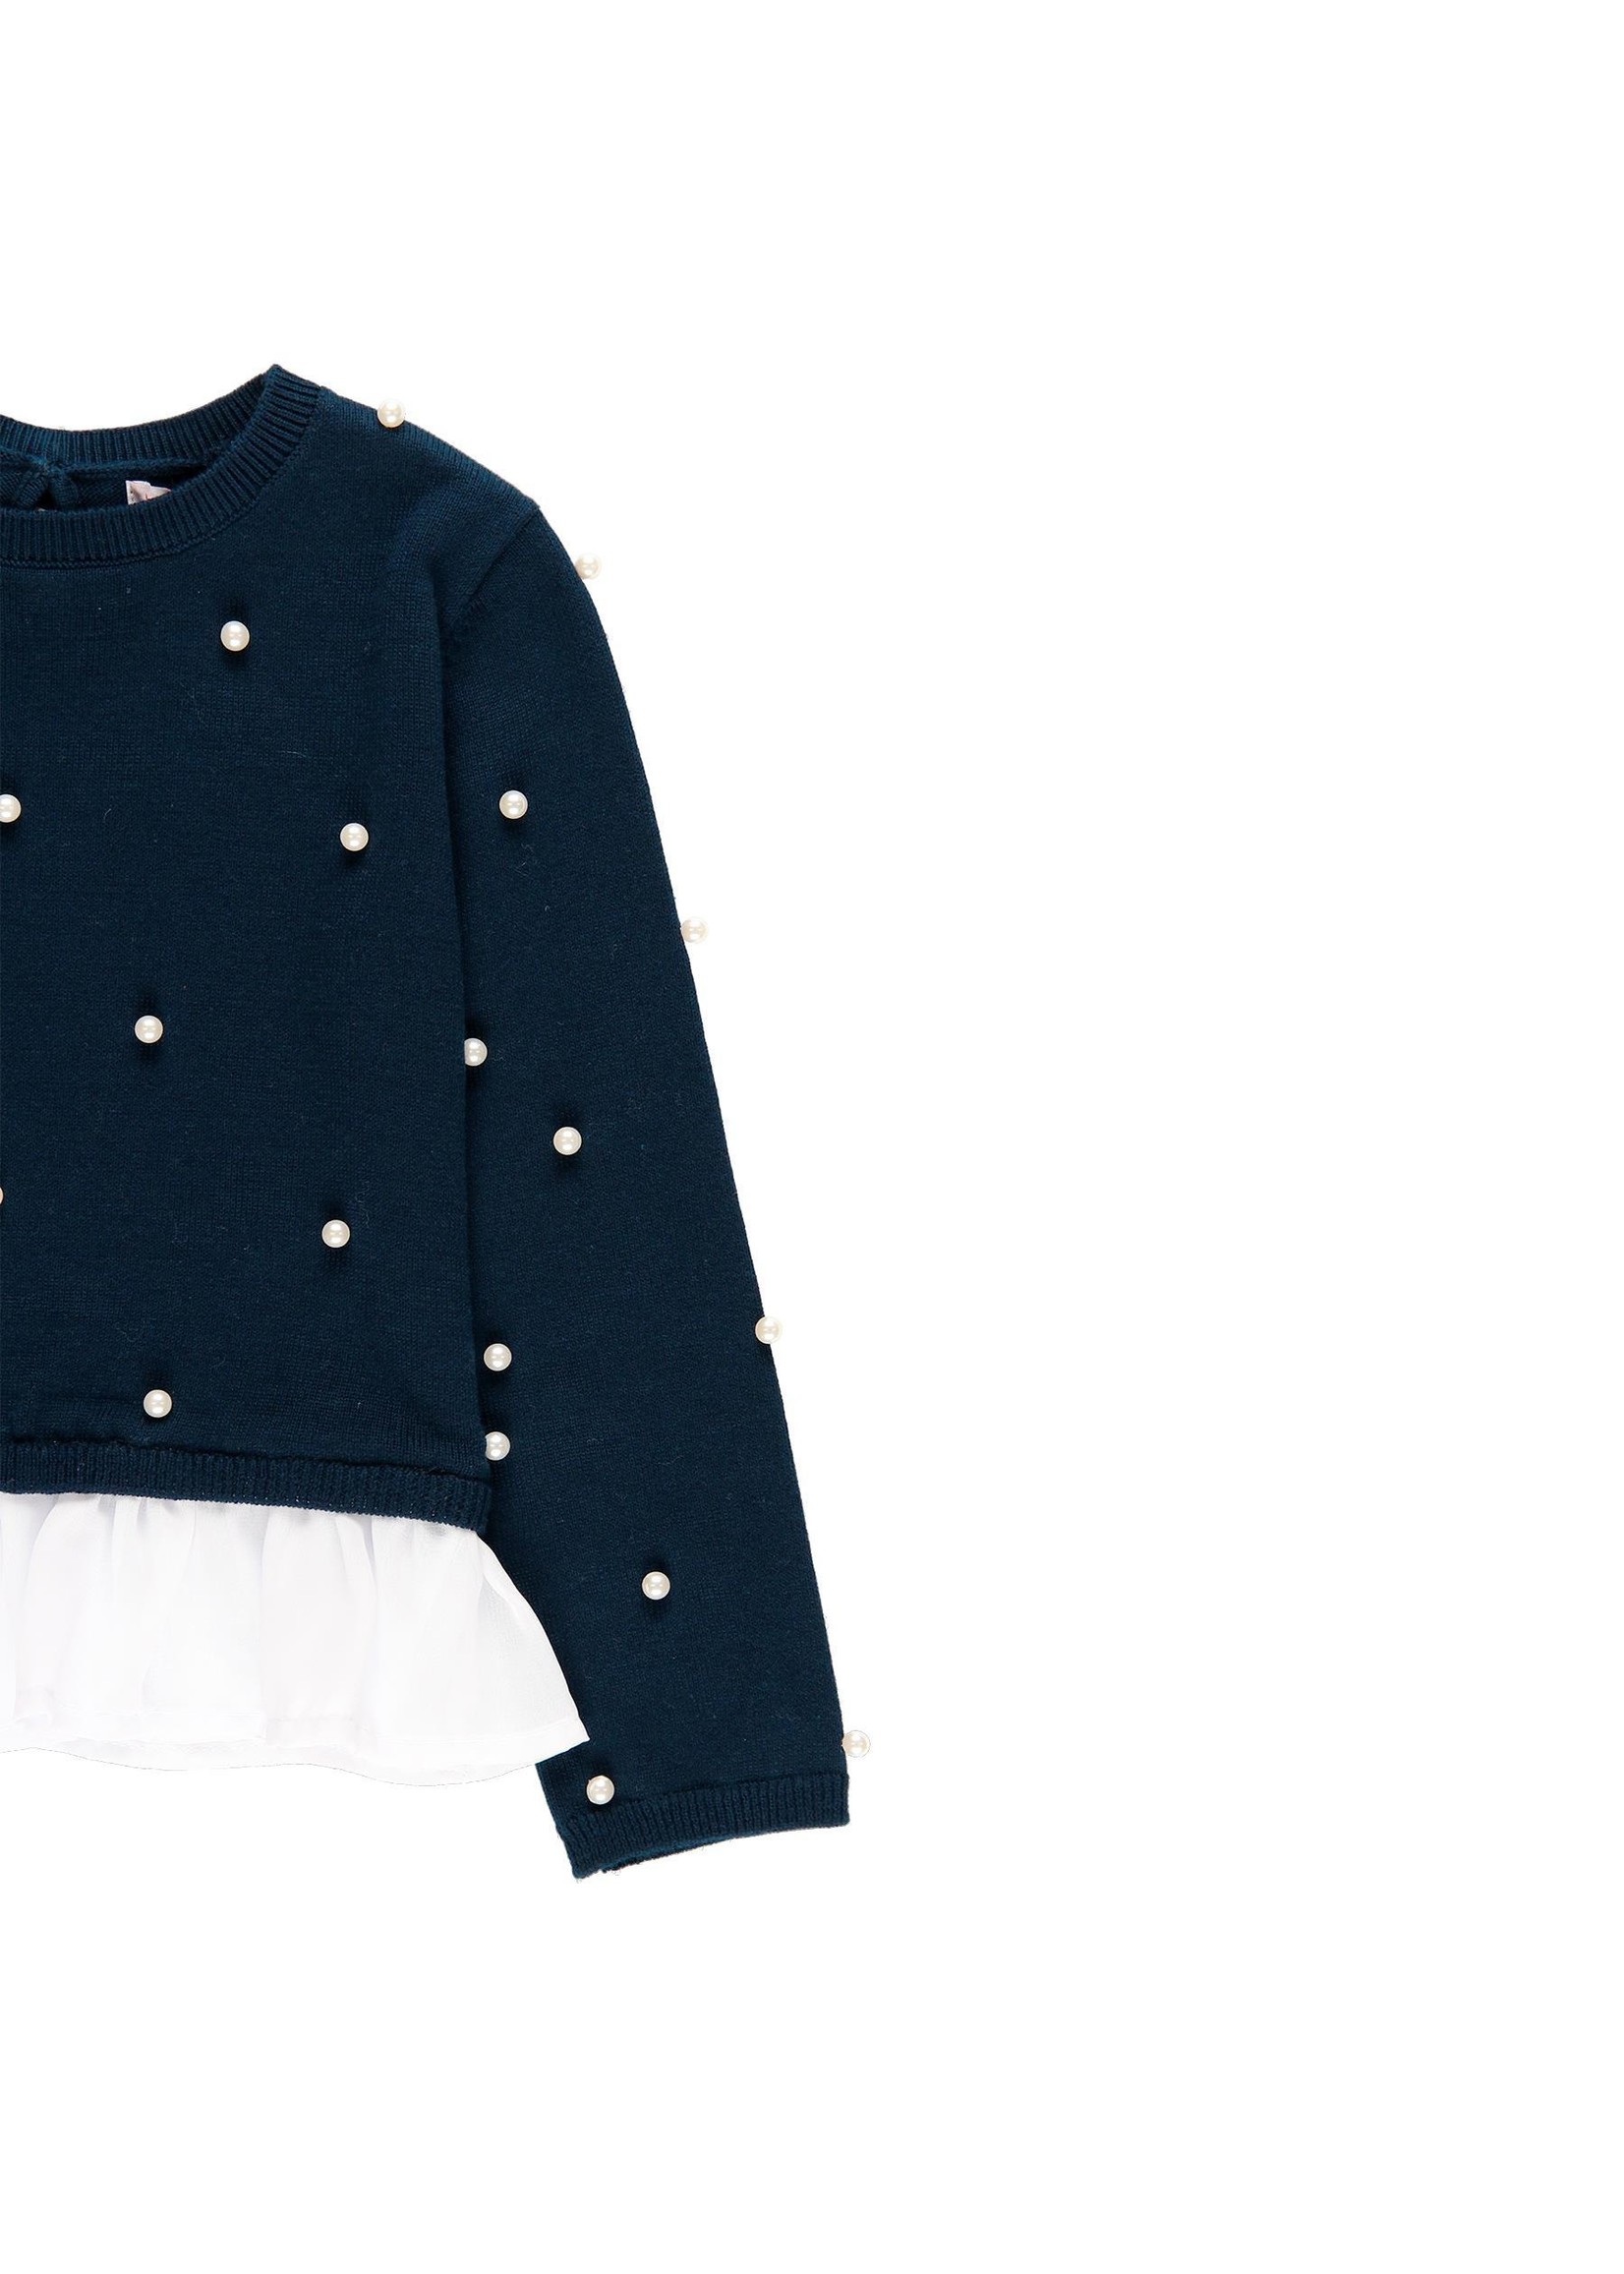 Boboli Knitwear combined pullover for girl NAVY 729097